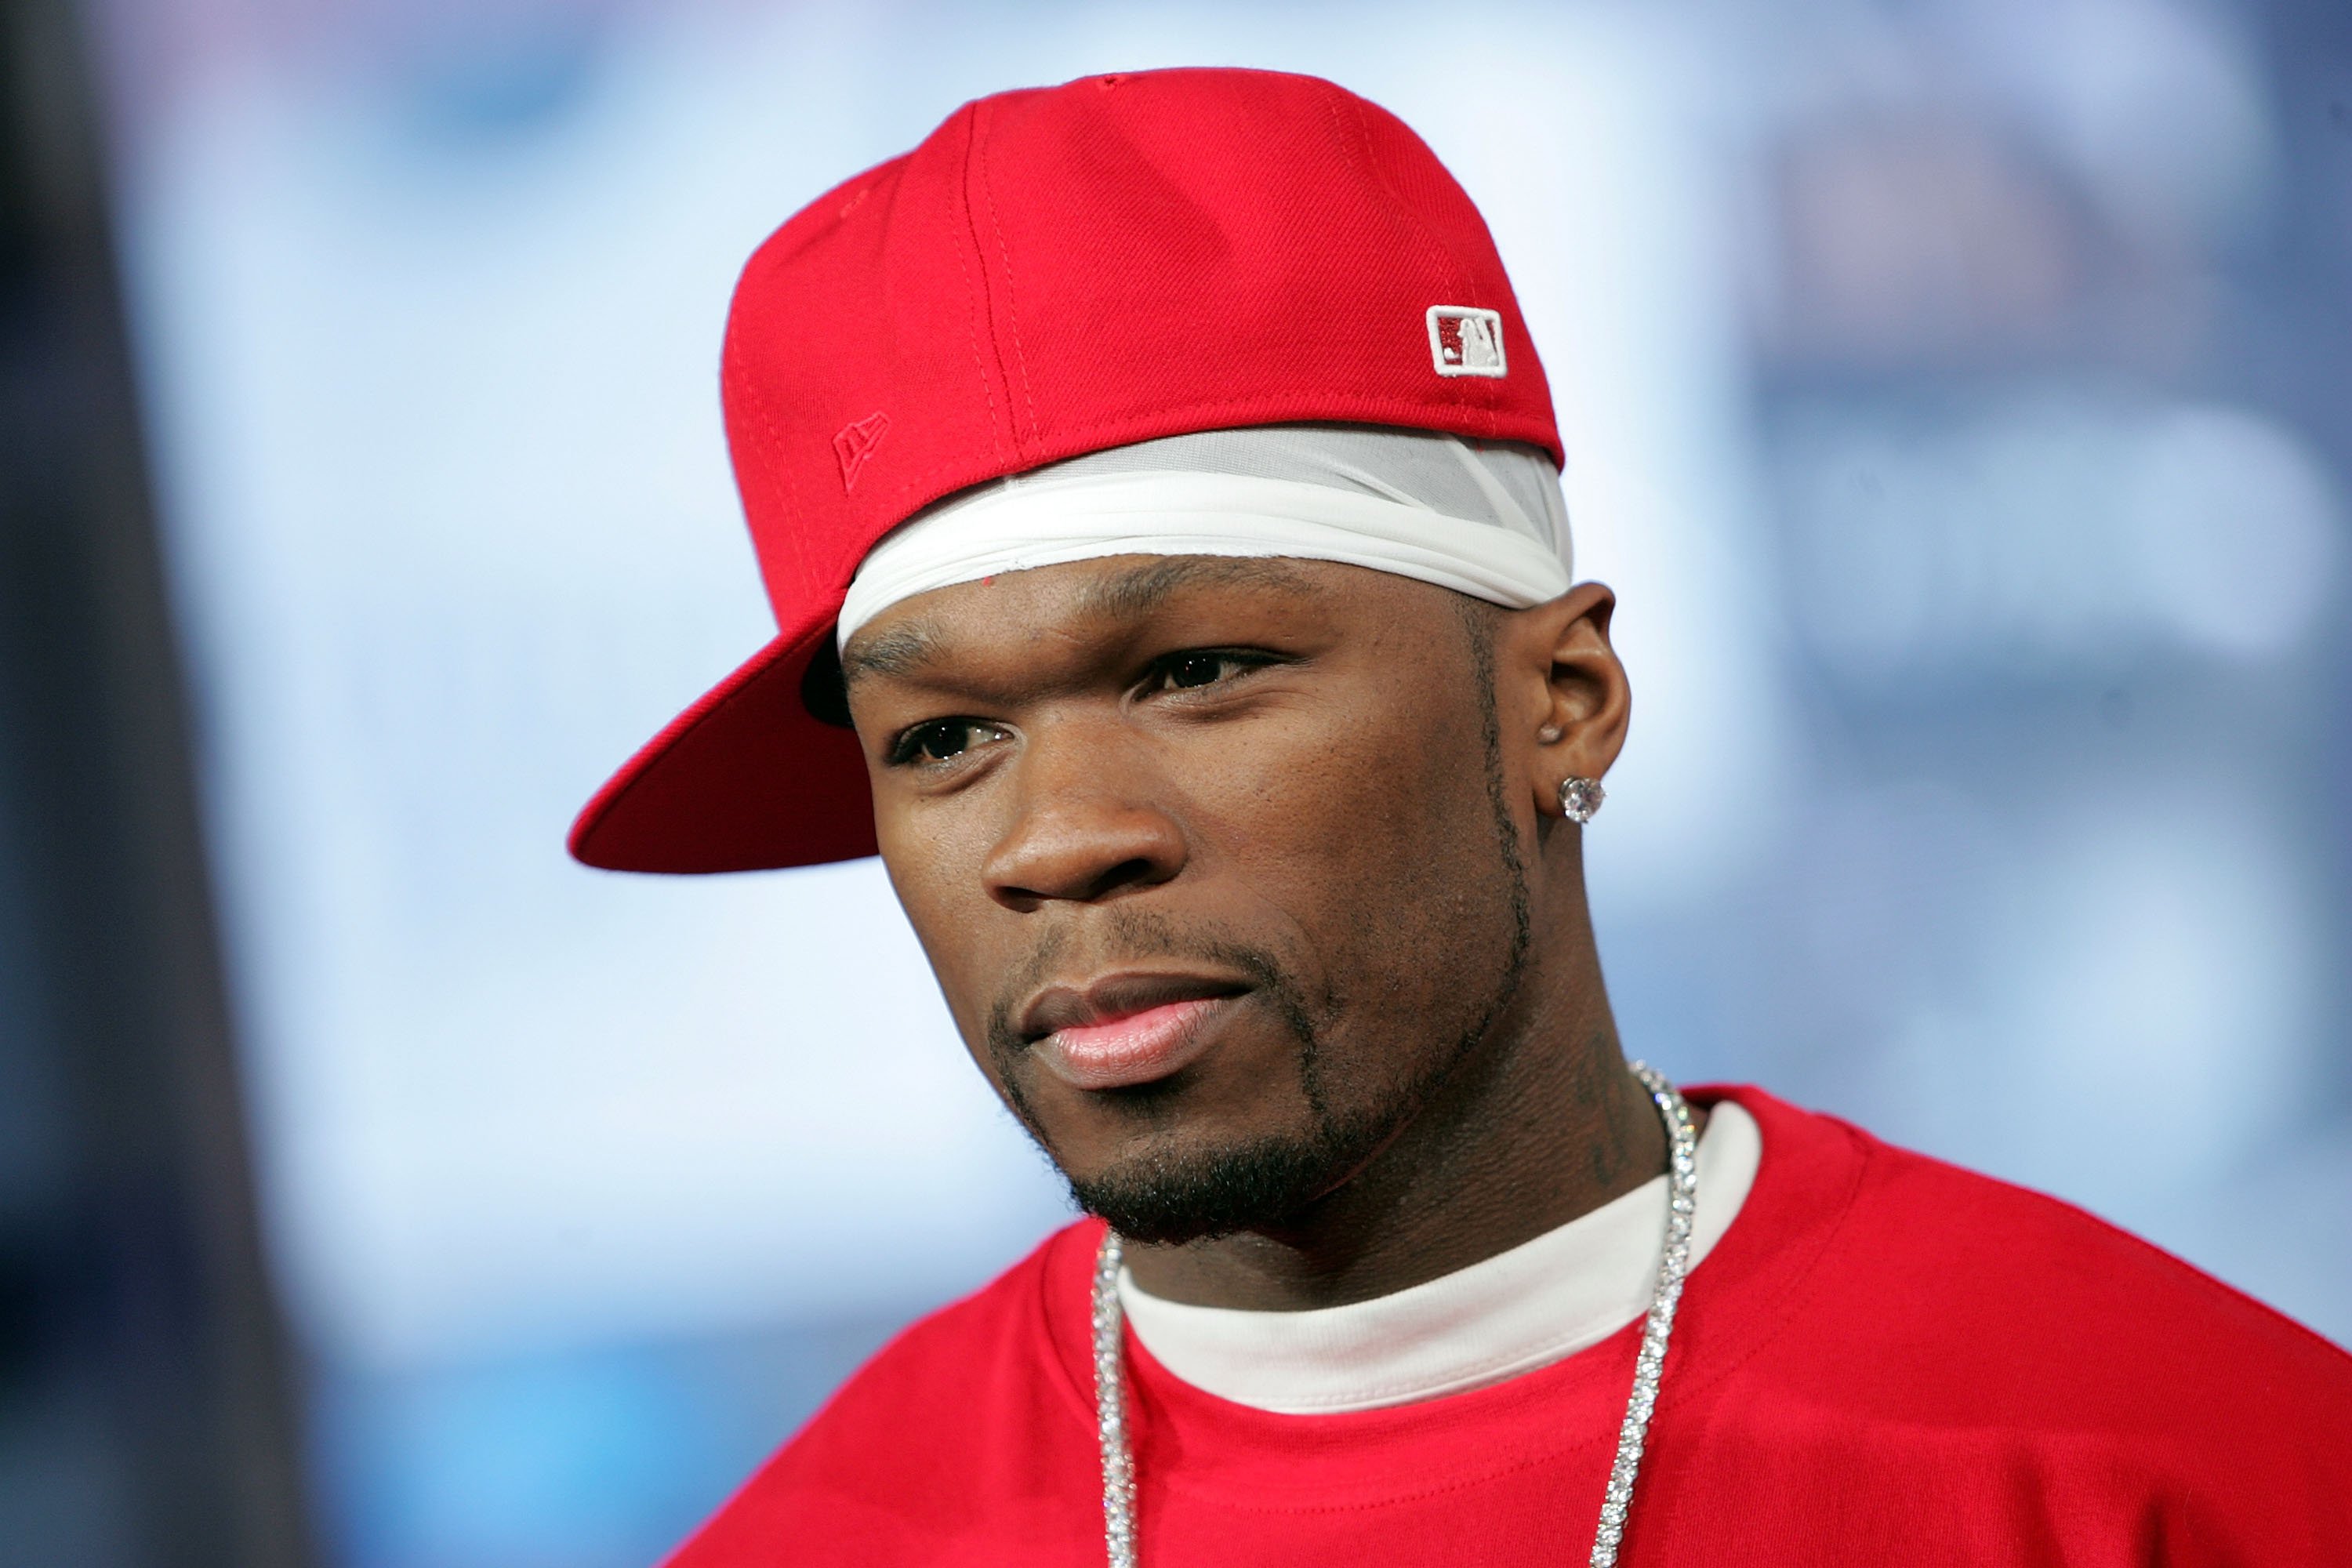 50 Cent wearing a red shirt